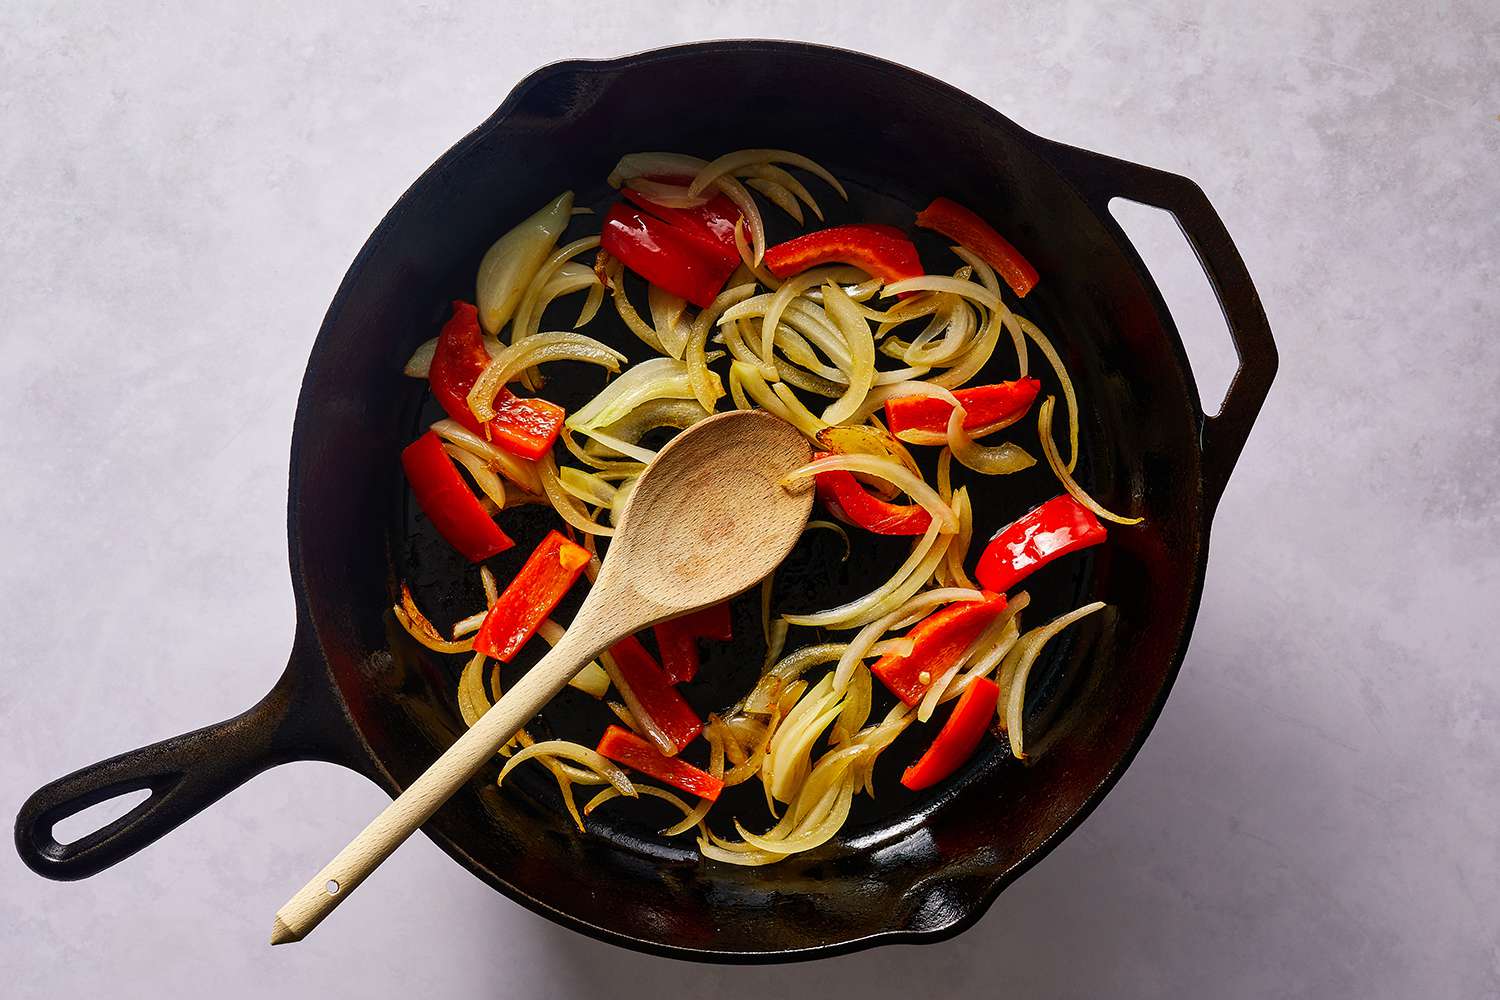 Onions and peppers in a cast iron skillet with a wooden spoon 